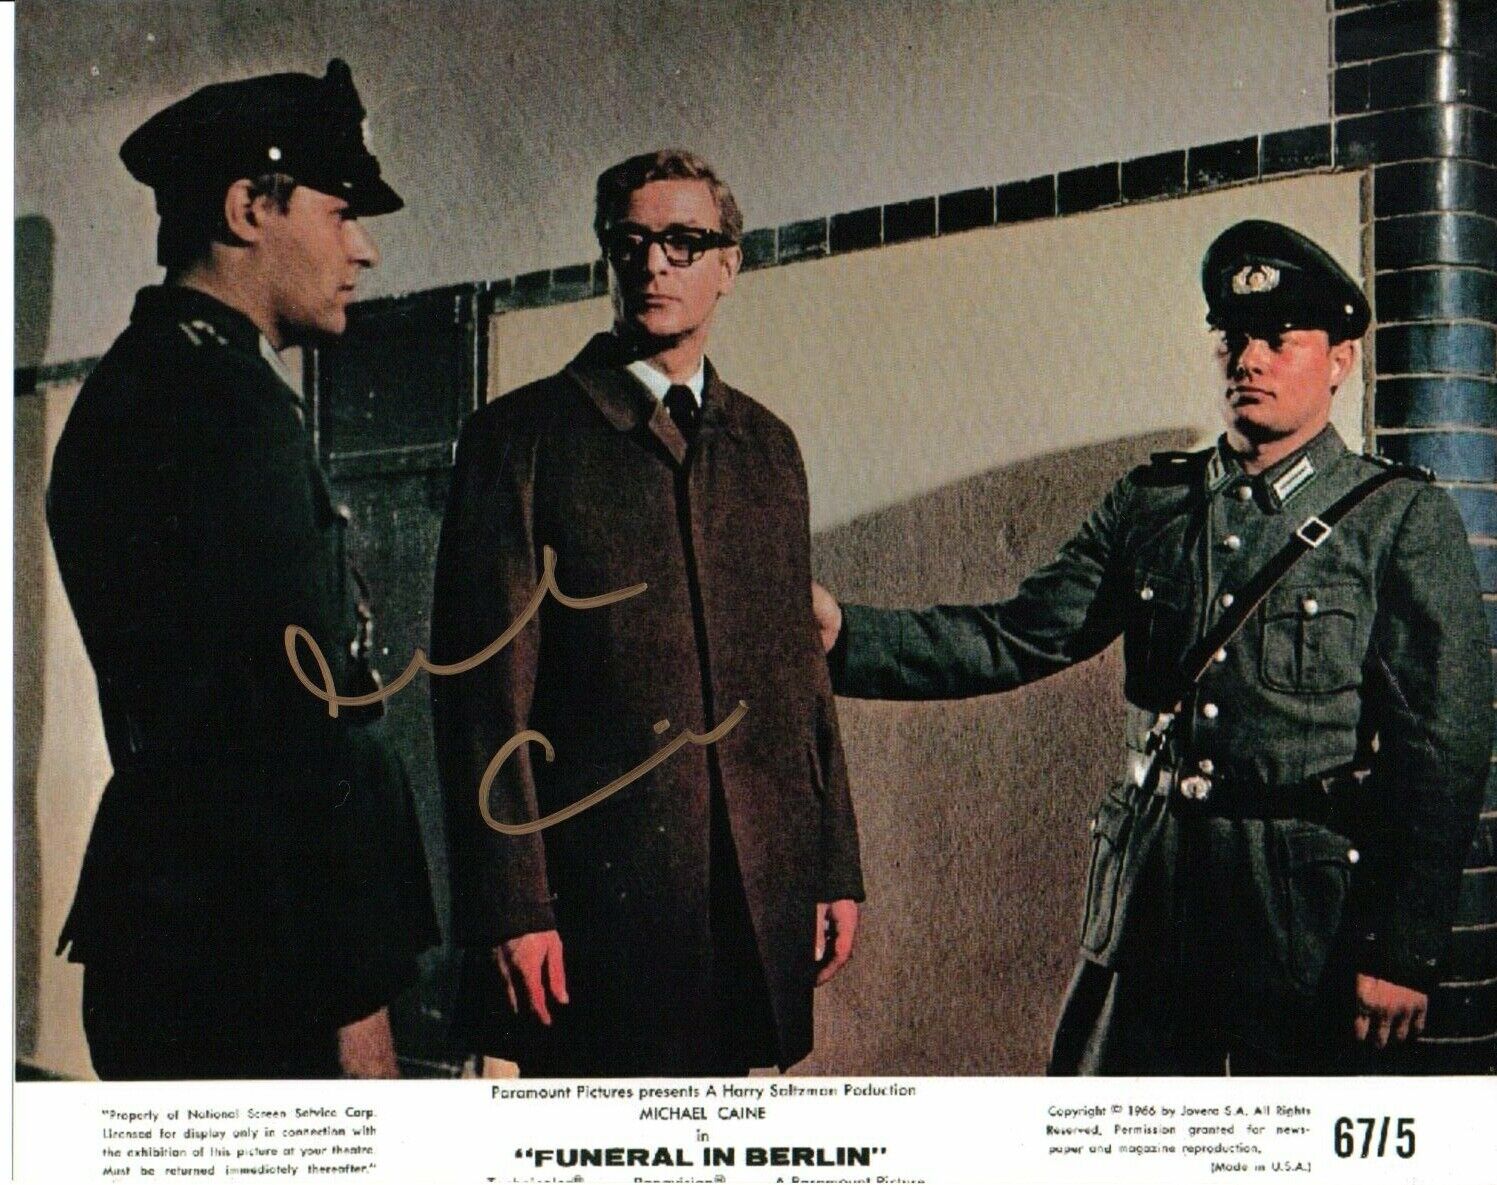 Michael Caine Signed 10x8 Photo Poster painting Film Star Autograph Funeral In Berlin